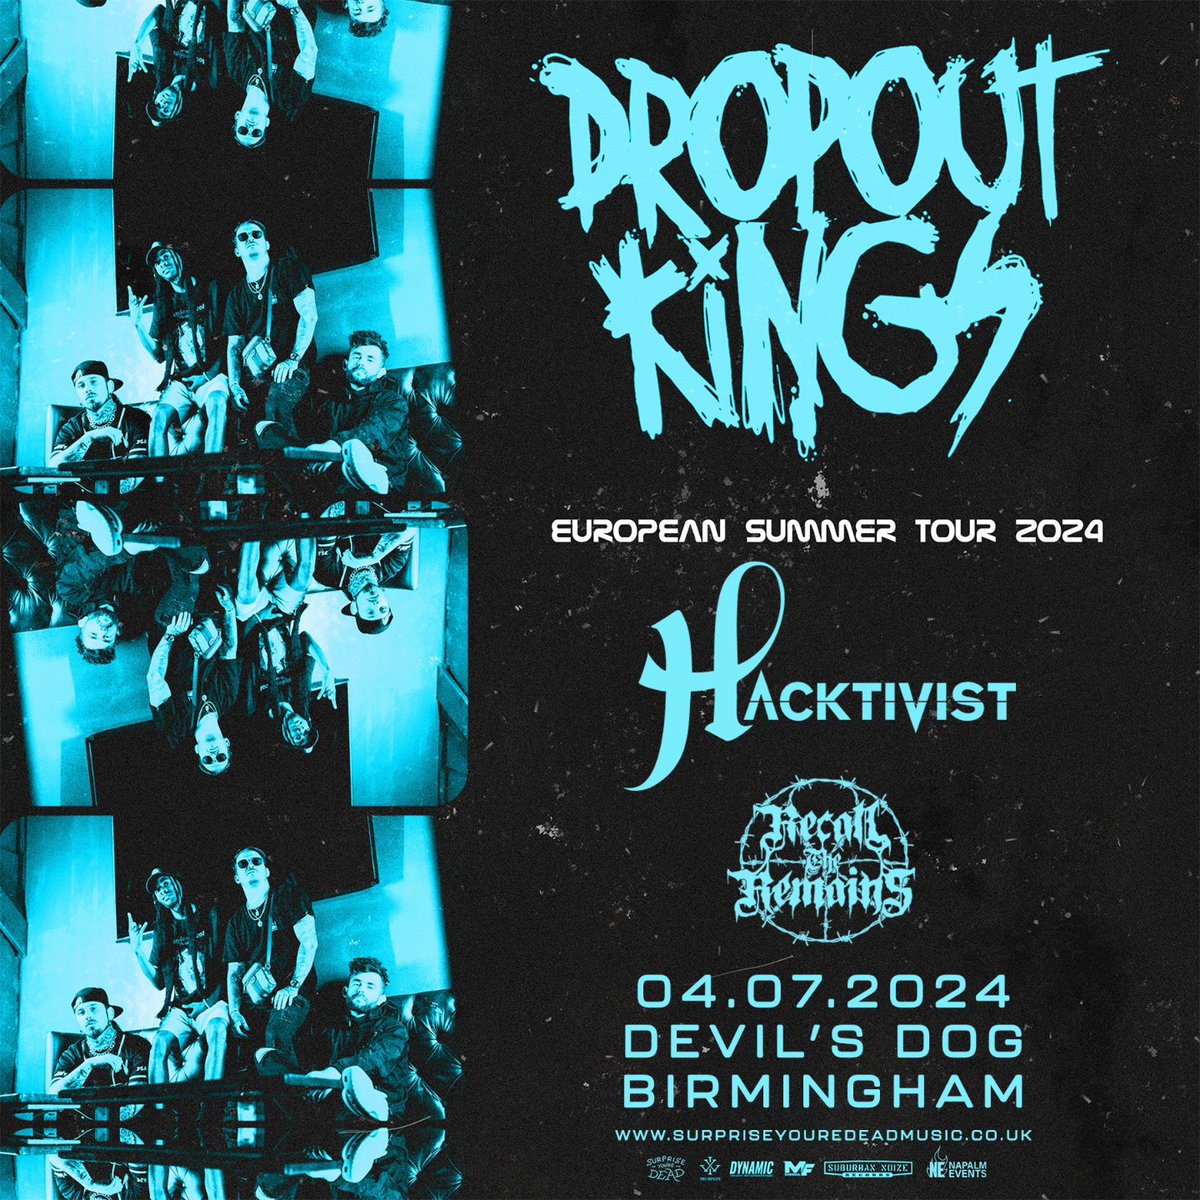 We'll be supporting dropout kings and hacktivist when their European tour rolls into Birmingham. Get in touch for tickets 🤙